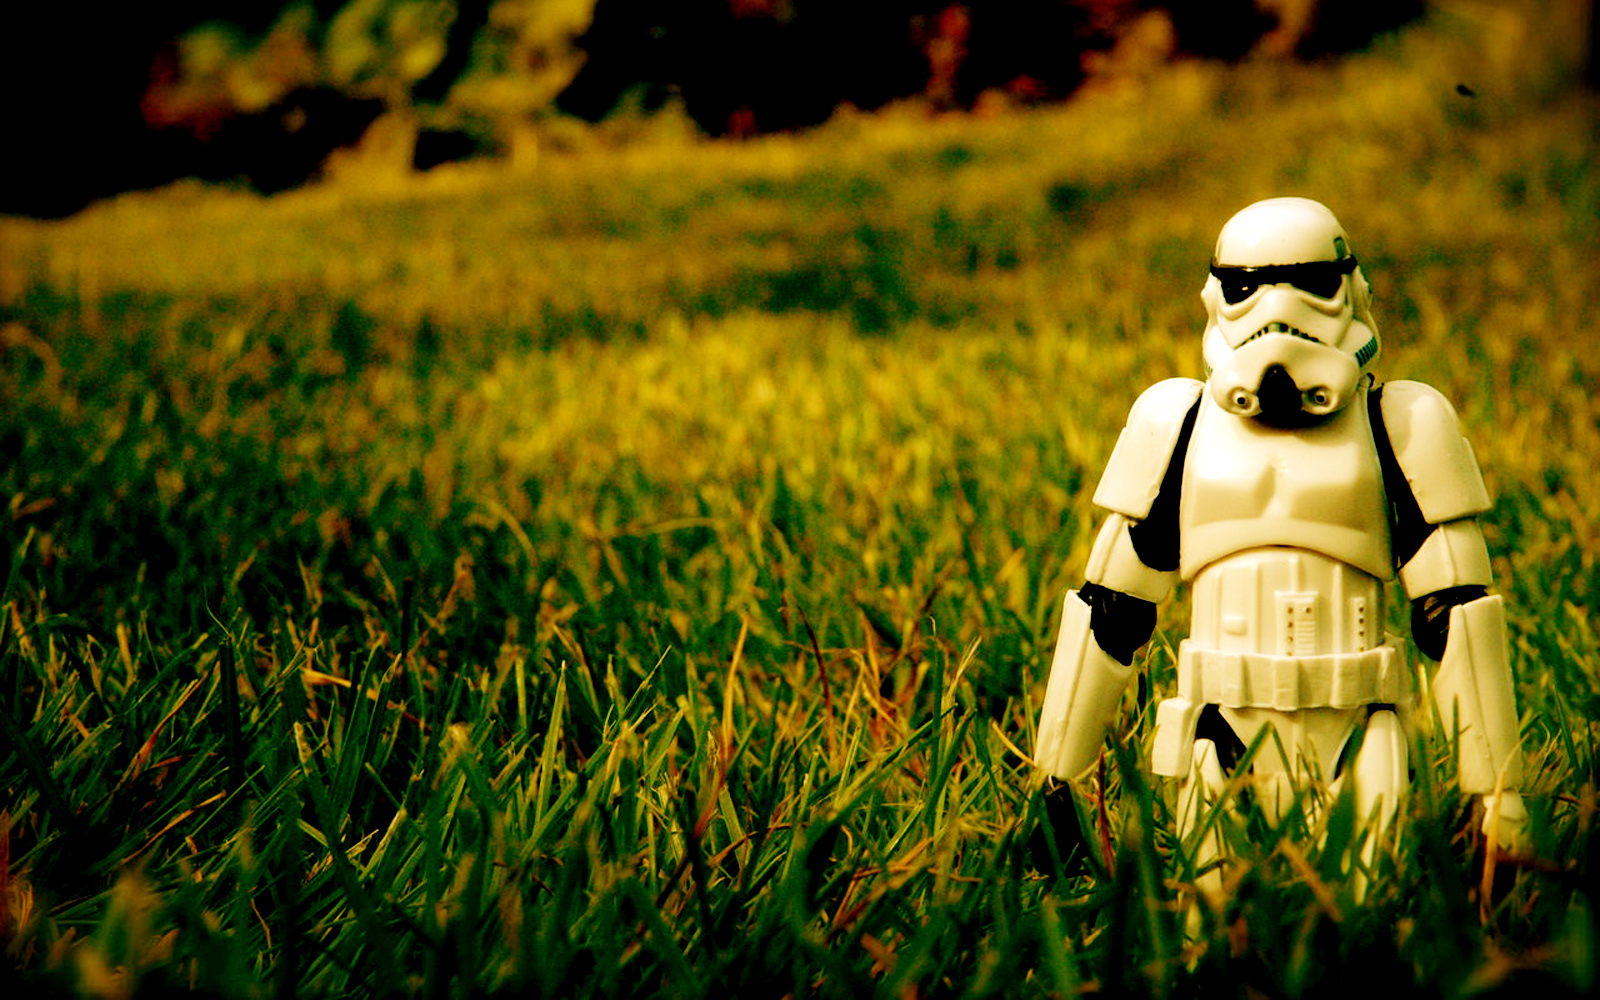 stormtrooper wallpaper,people in nature,grass,yellow,toy,grass family